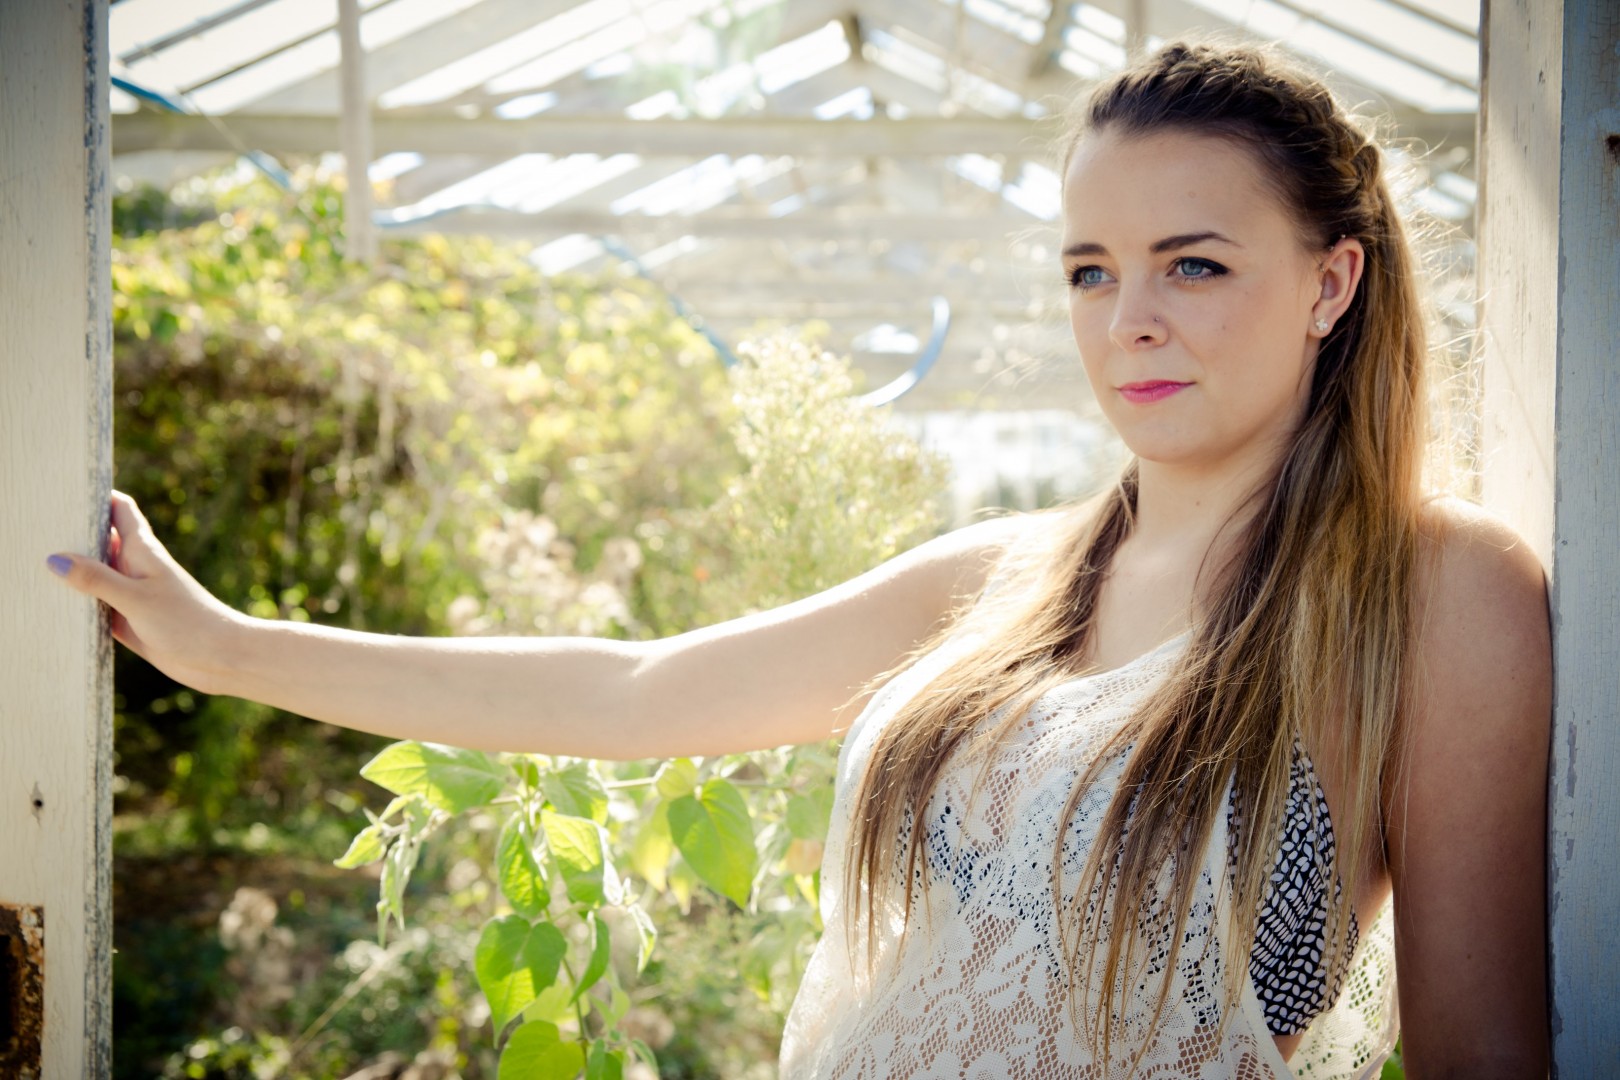 2nd Shoot with Katelin in a disused Greenhouse